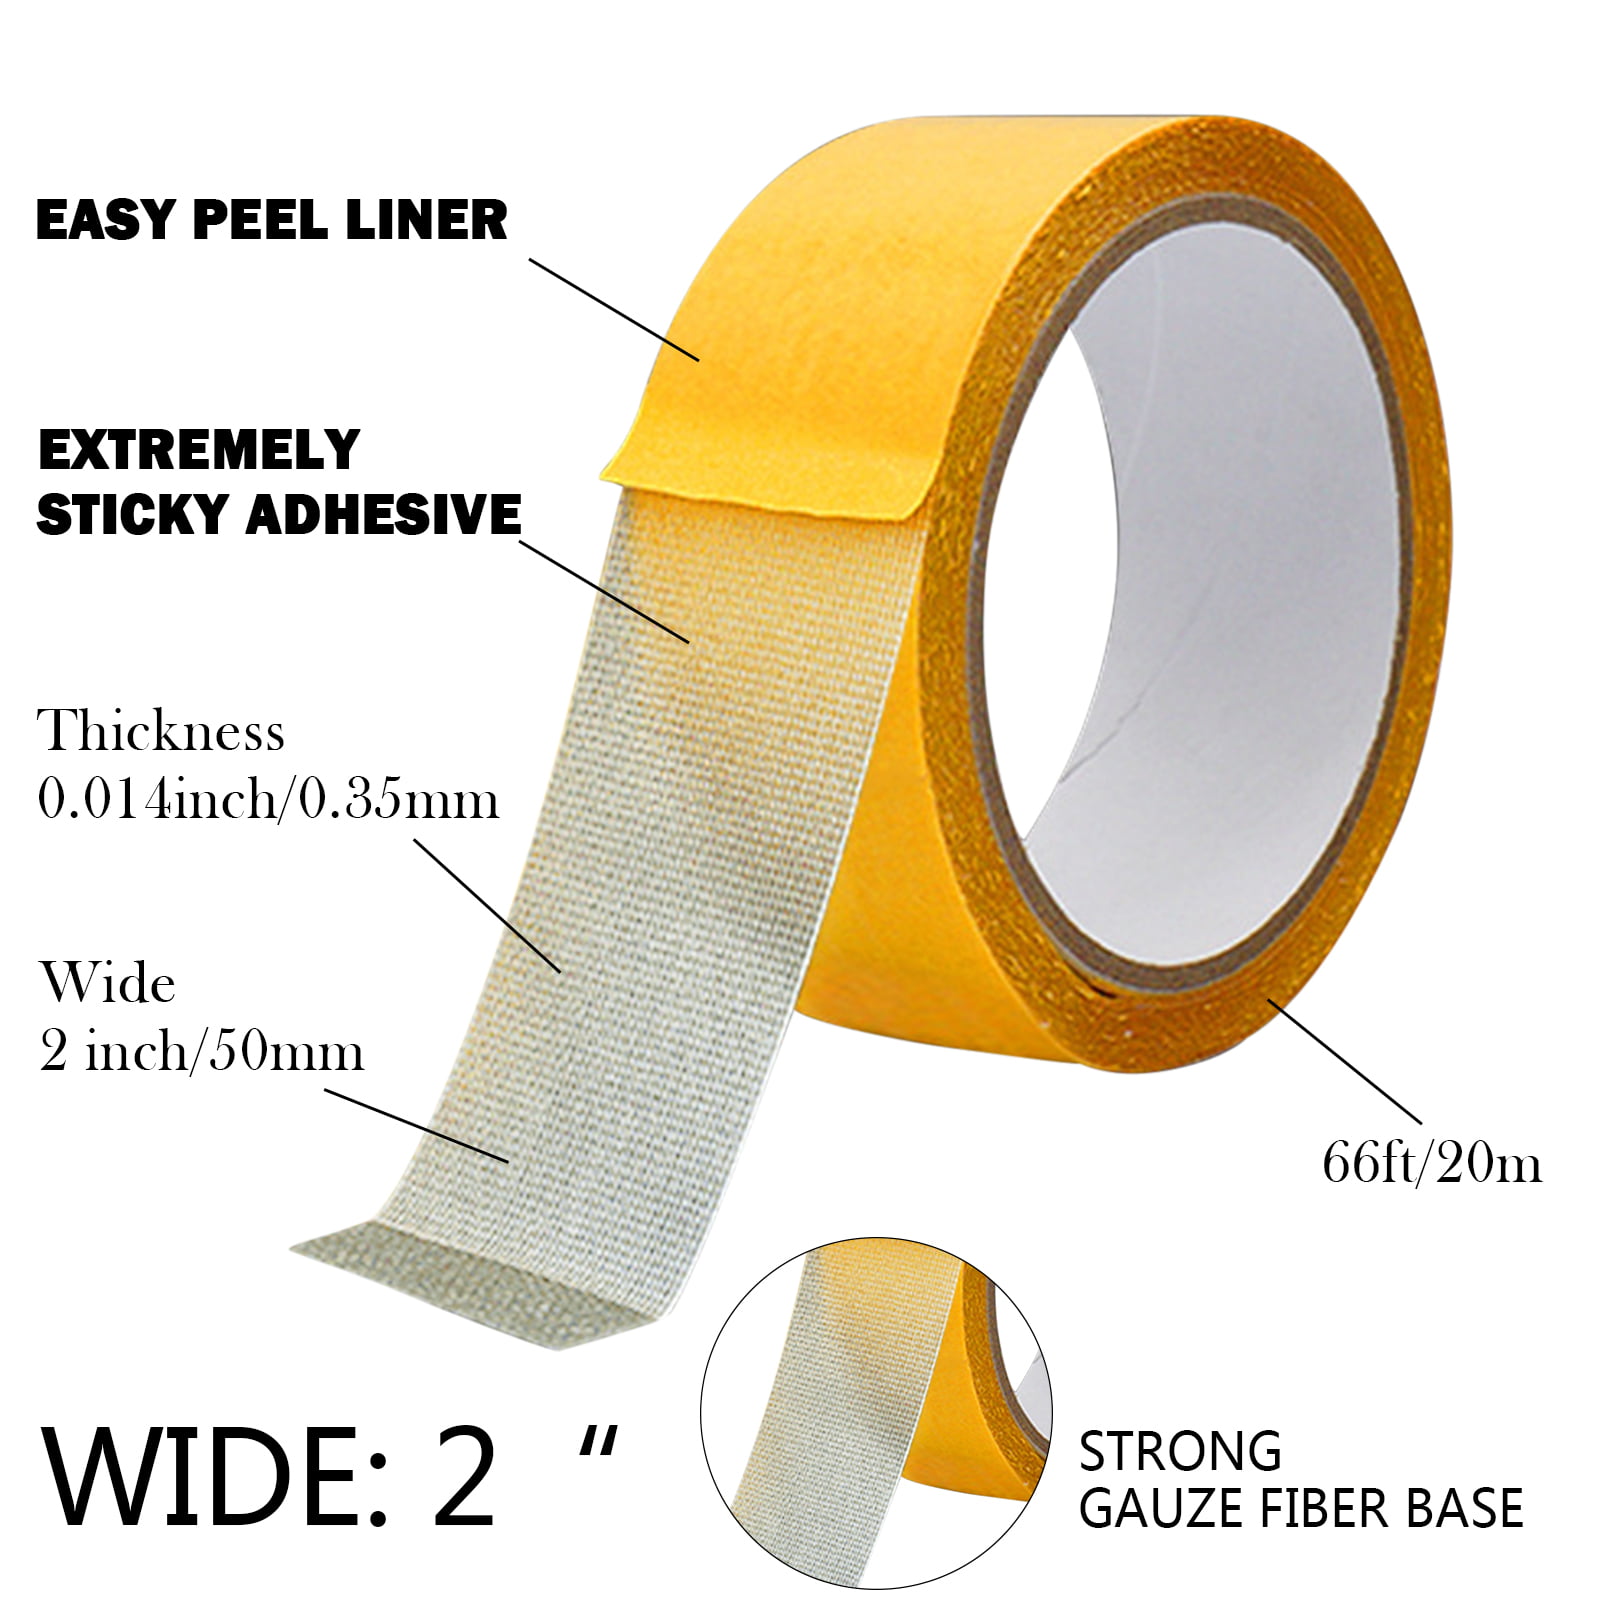 1 Roll Double Sided Tape Heavy Duty, 2inx66FT(20m), Universal High Tack  Strong Wall Adhesive with Fiberglass Mesh, Super Sticky Resistente Clear  Tape, Easy Use Transparent Tape 